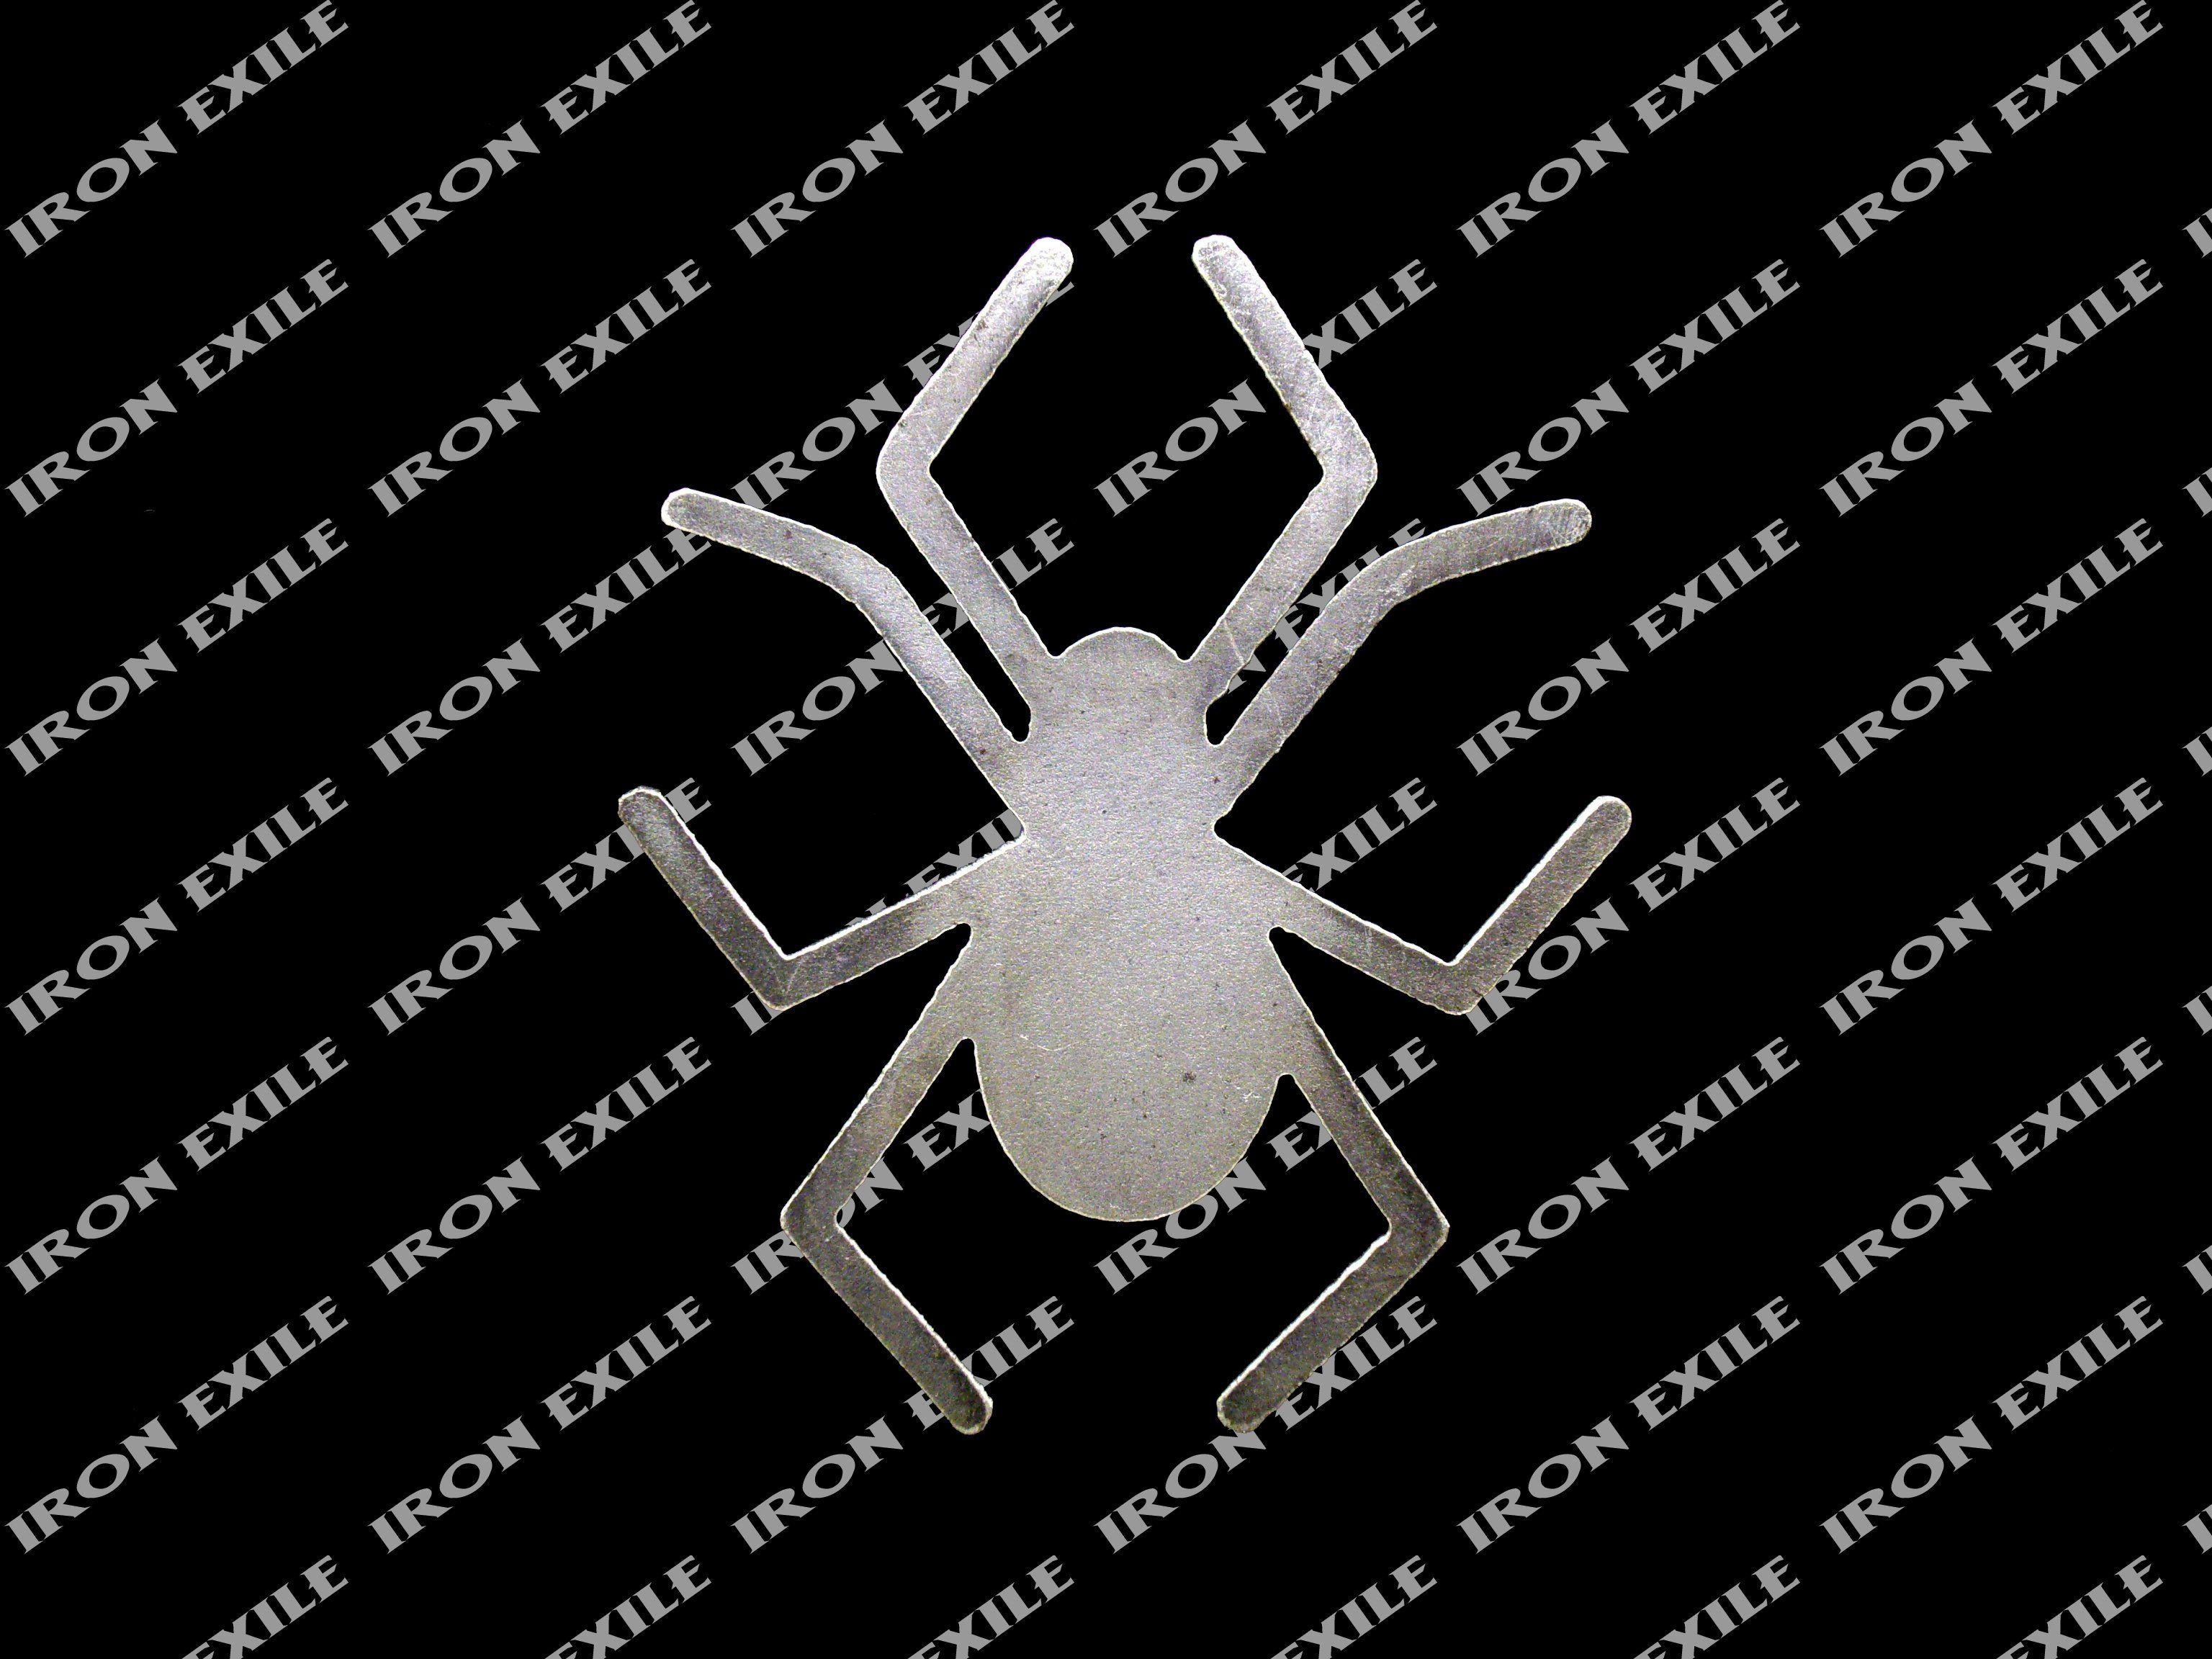 Spider -Man 3 Logo - Details about Metal Spider #3 Paint Stencil for Halloween Decor Decorations  or Hot Rat Rod USA